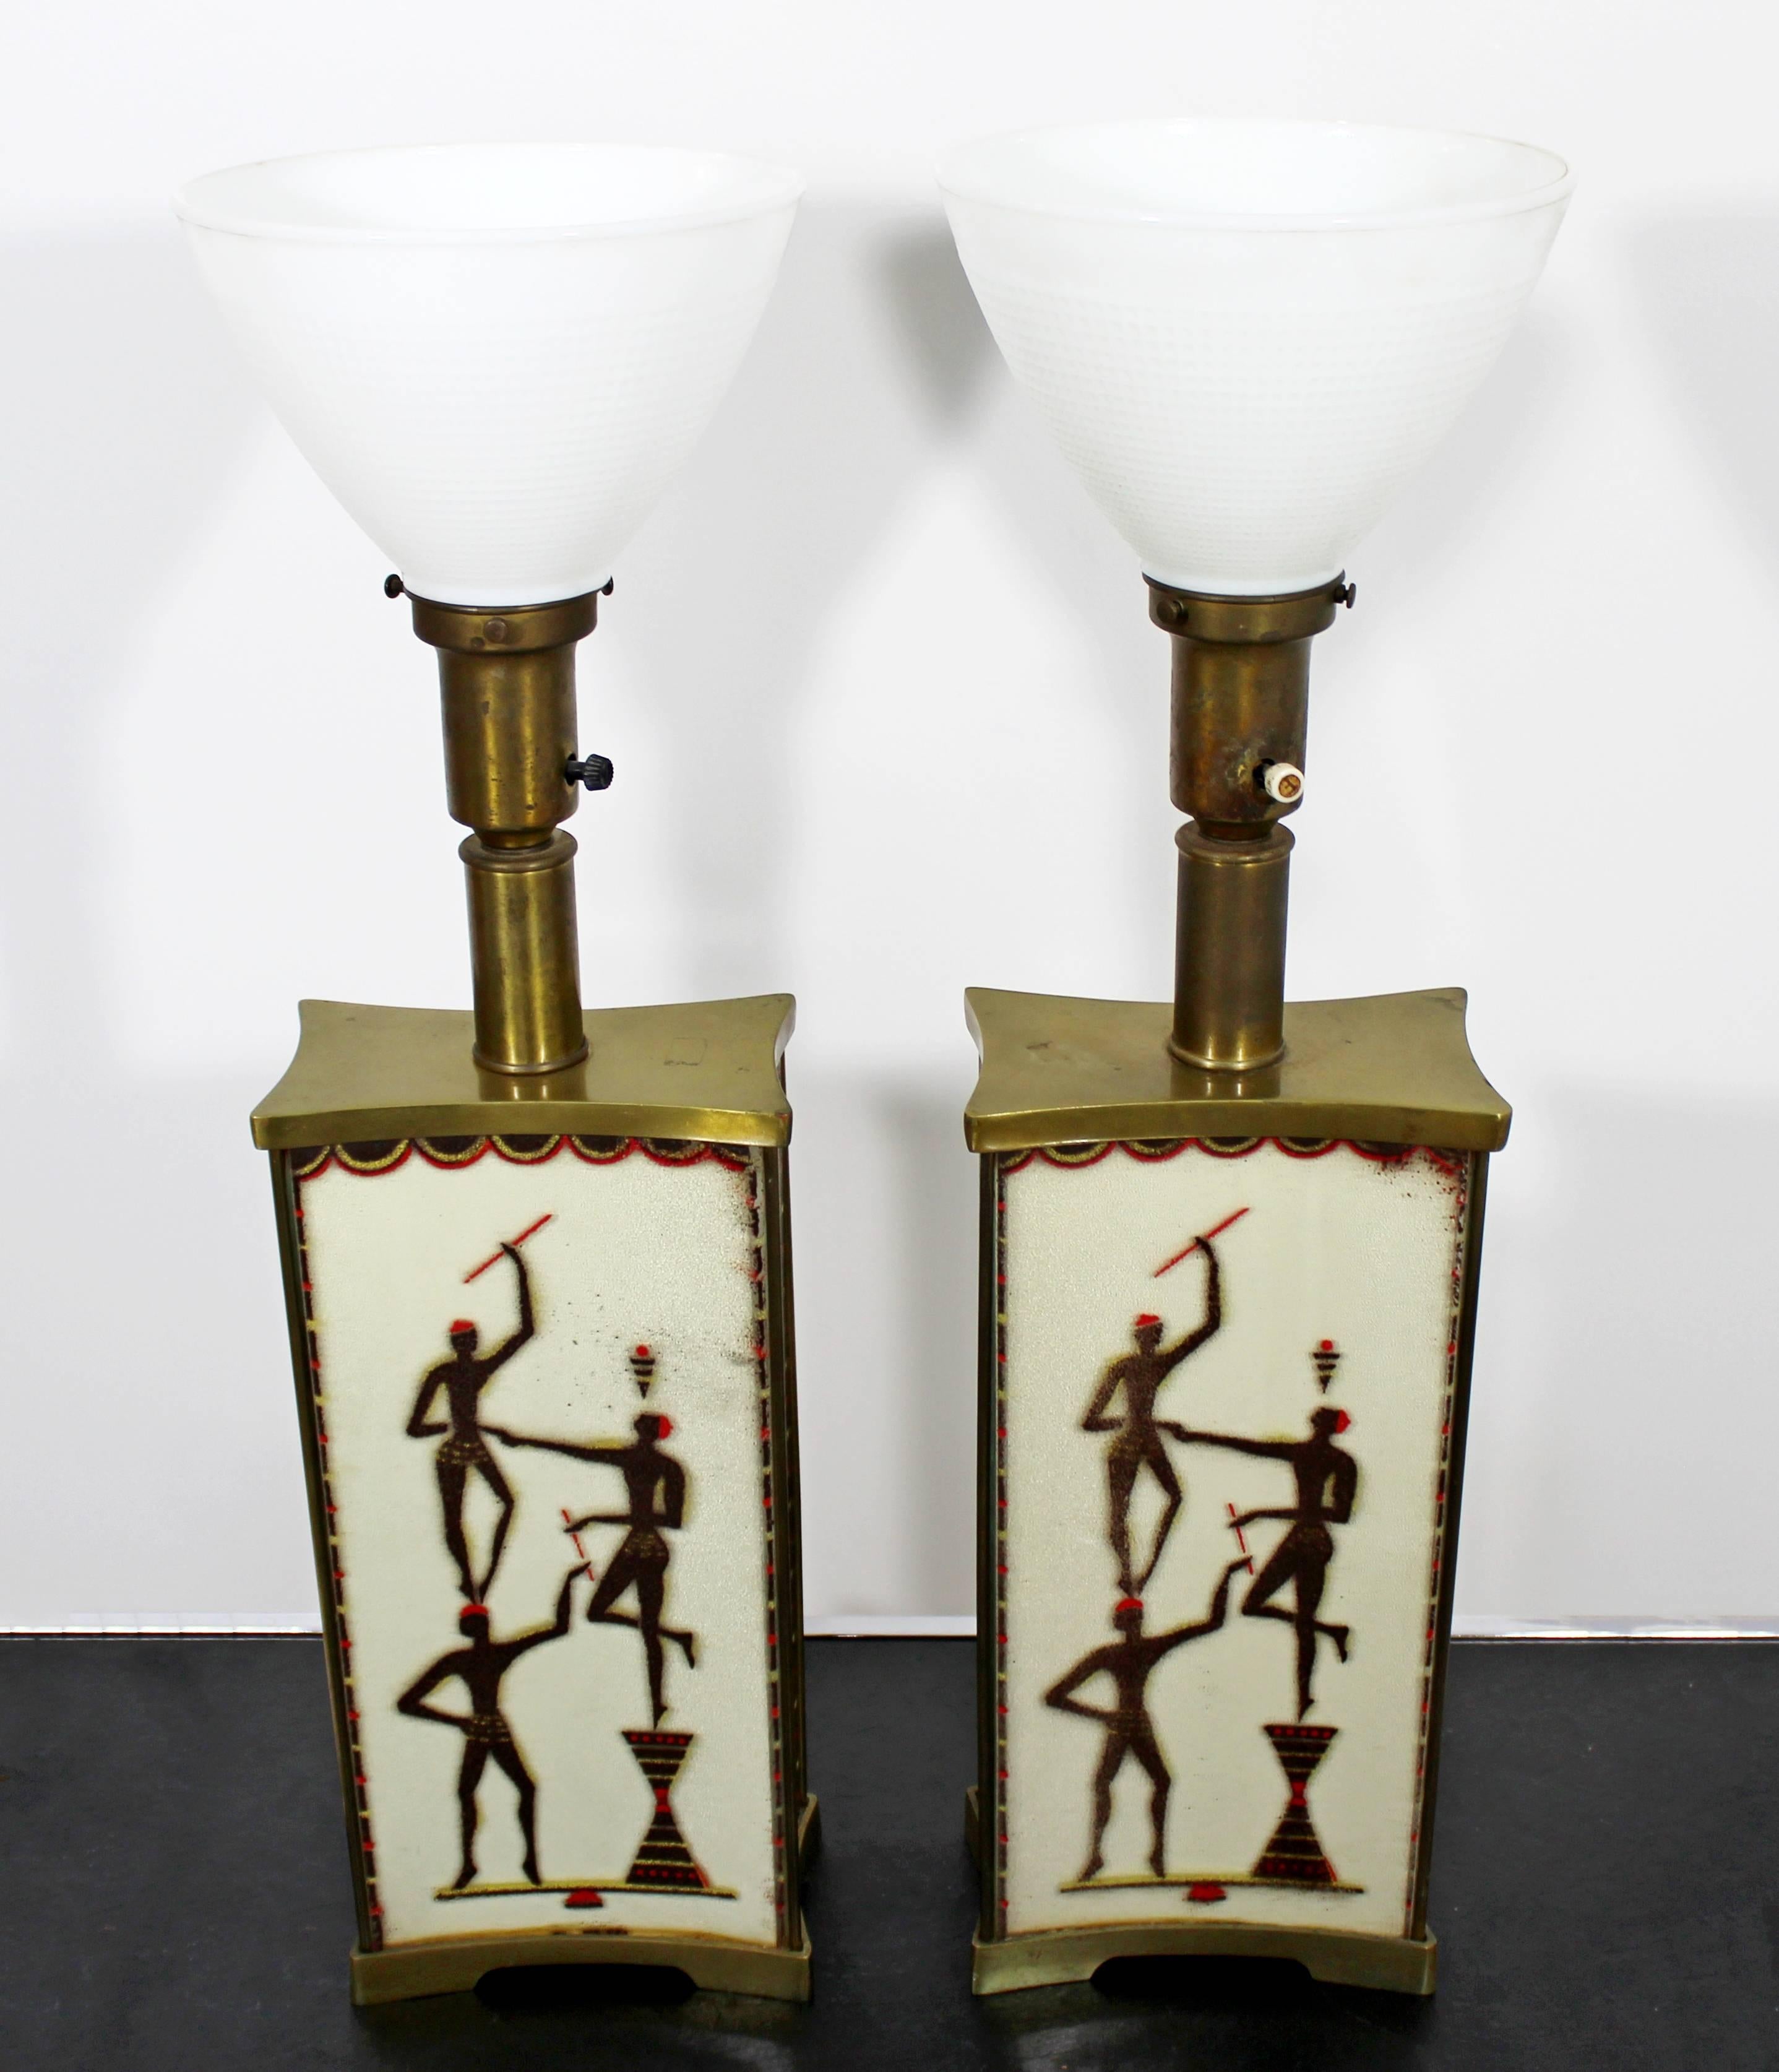 American Art Deco Super Rare Maurice Heaton Pair of Four-Panel Tribal Table Lamps Glass